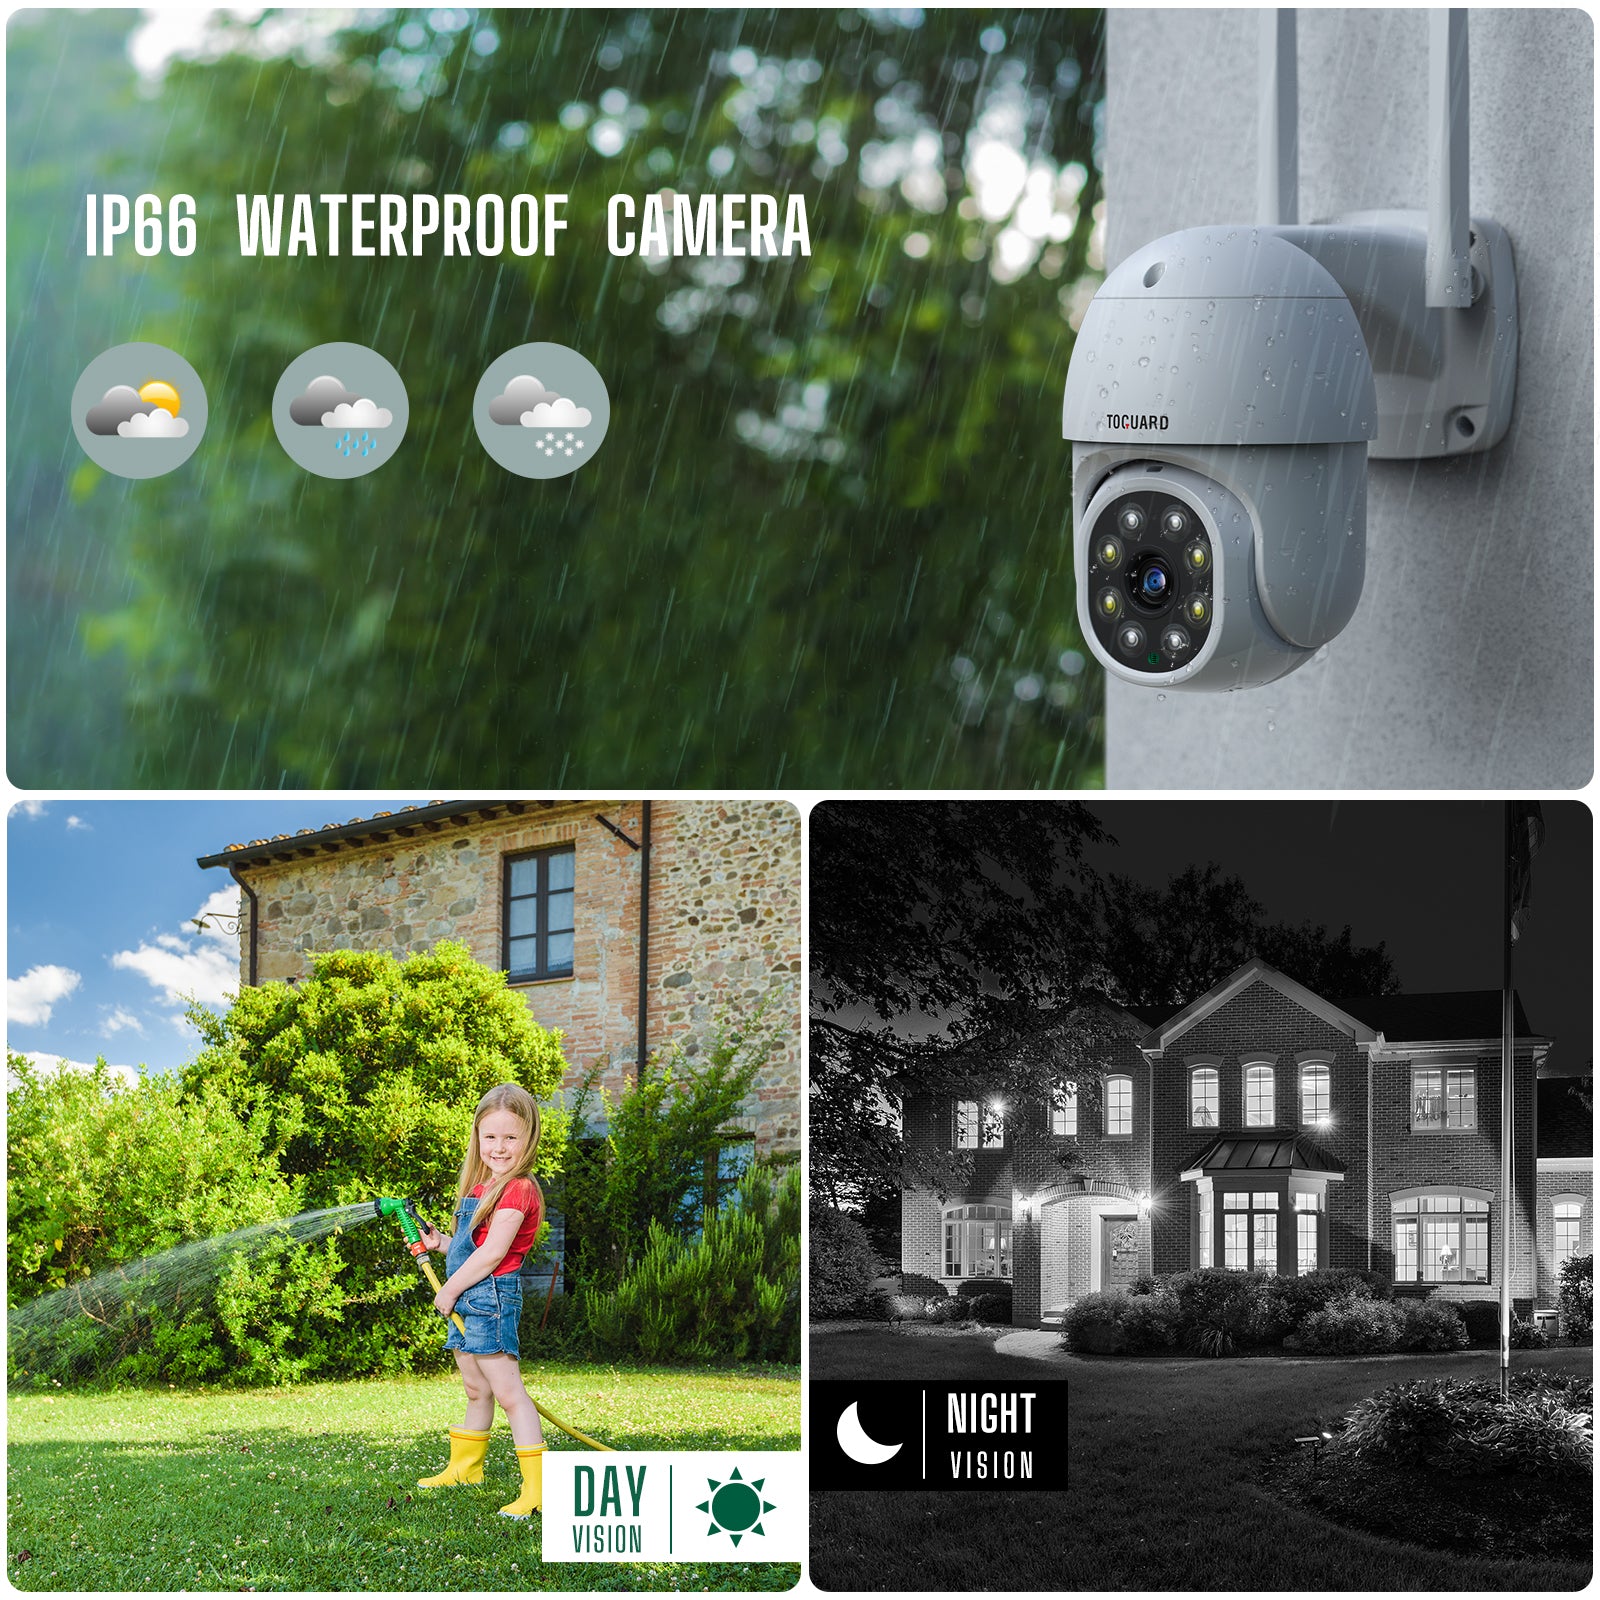 Toguard W310 Wireless Home Security Camera System Outdoor PTZ Cameras and Bullet Cameras（Only available in Canada）